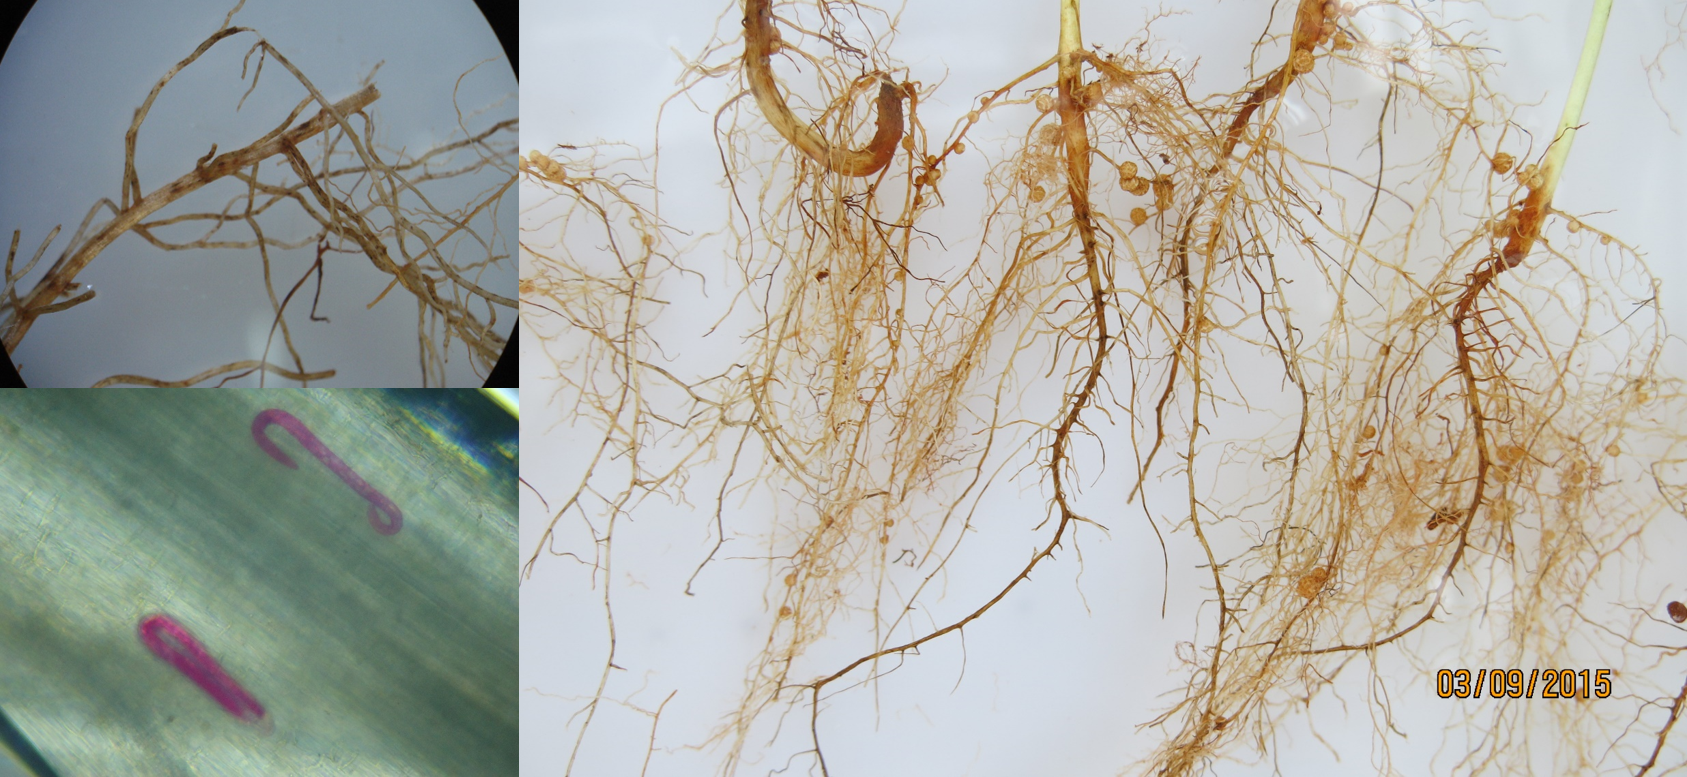 Figure 2 - Soybean root cultivar TMG 115 RR inoculated with 50 specimens of Helicotylenchus dihystera, with lesions caused by nematode parasitism. Helicotylenchus dihystera inside the roots of soybean cultivar TMG 115 RR, 70 days after inoculation. Photos: Santino A. da Silva and Priscila M. Amaro.